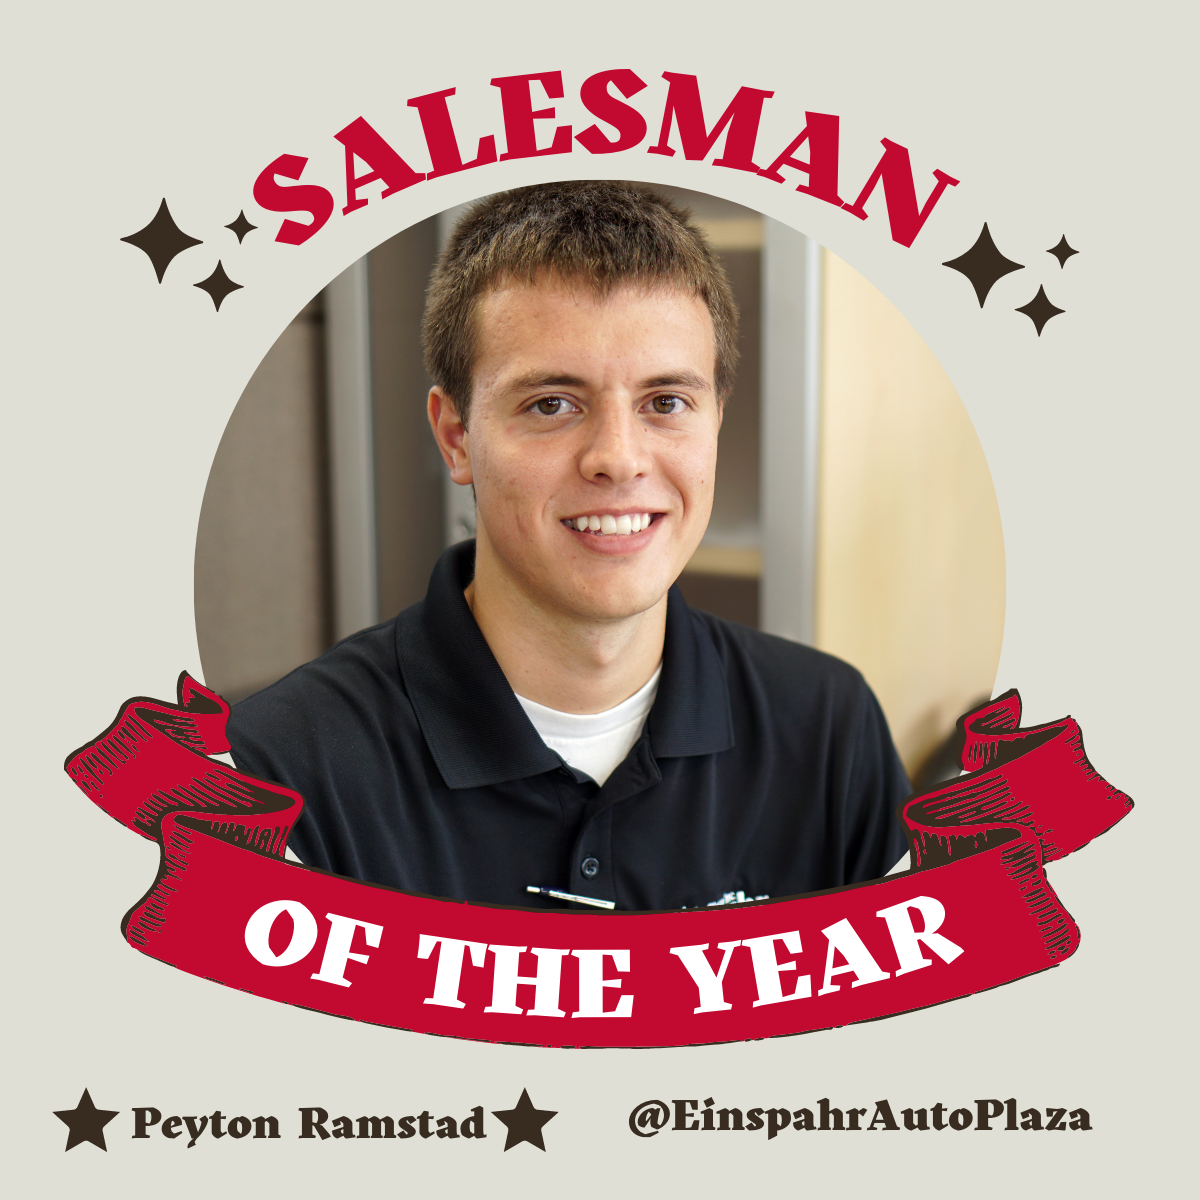 Salesman of the year